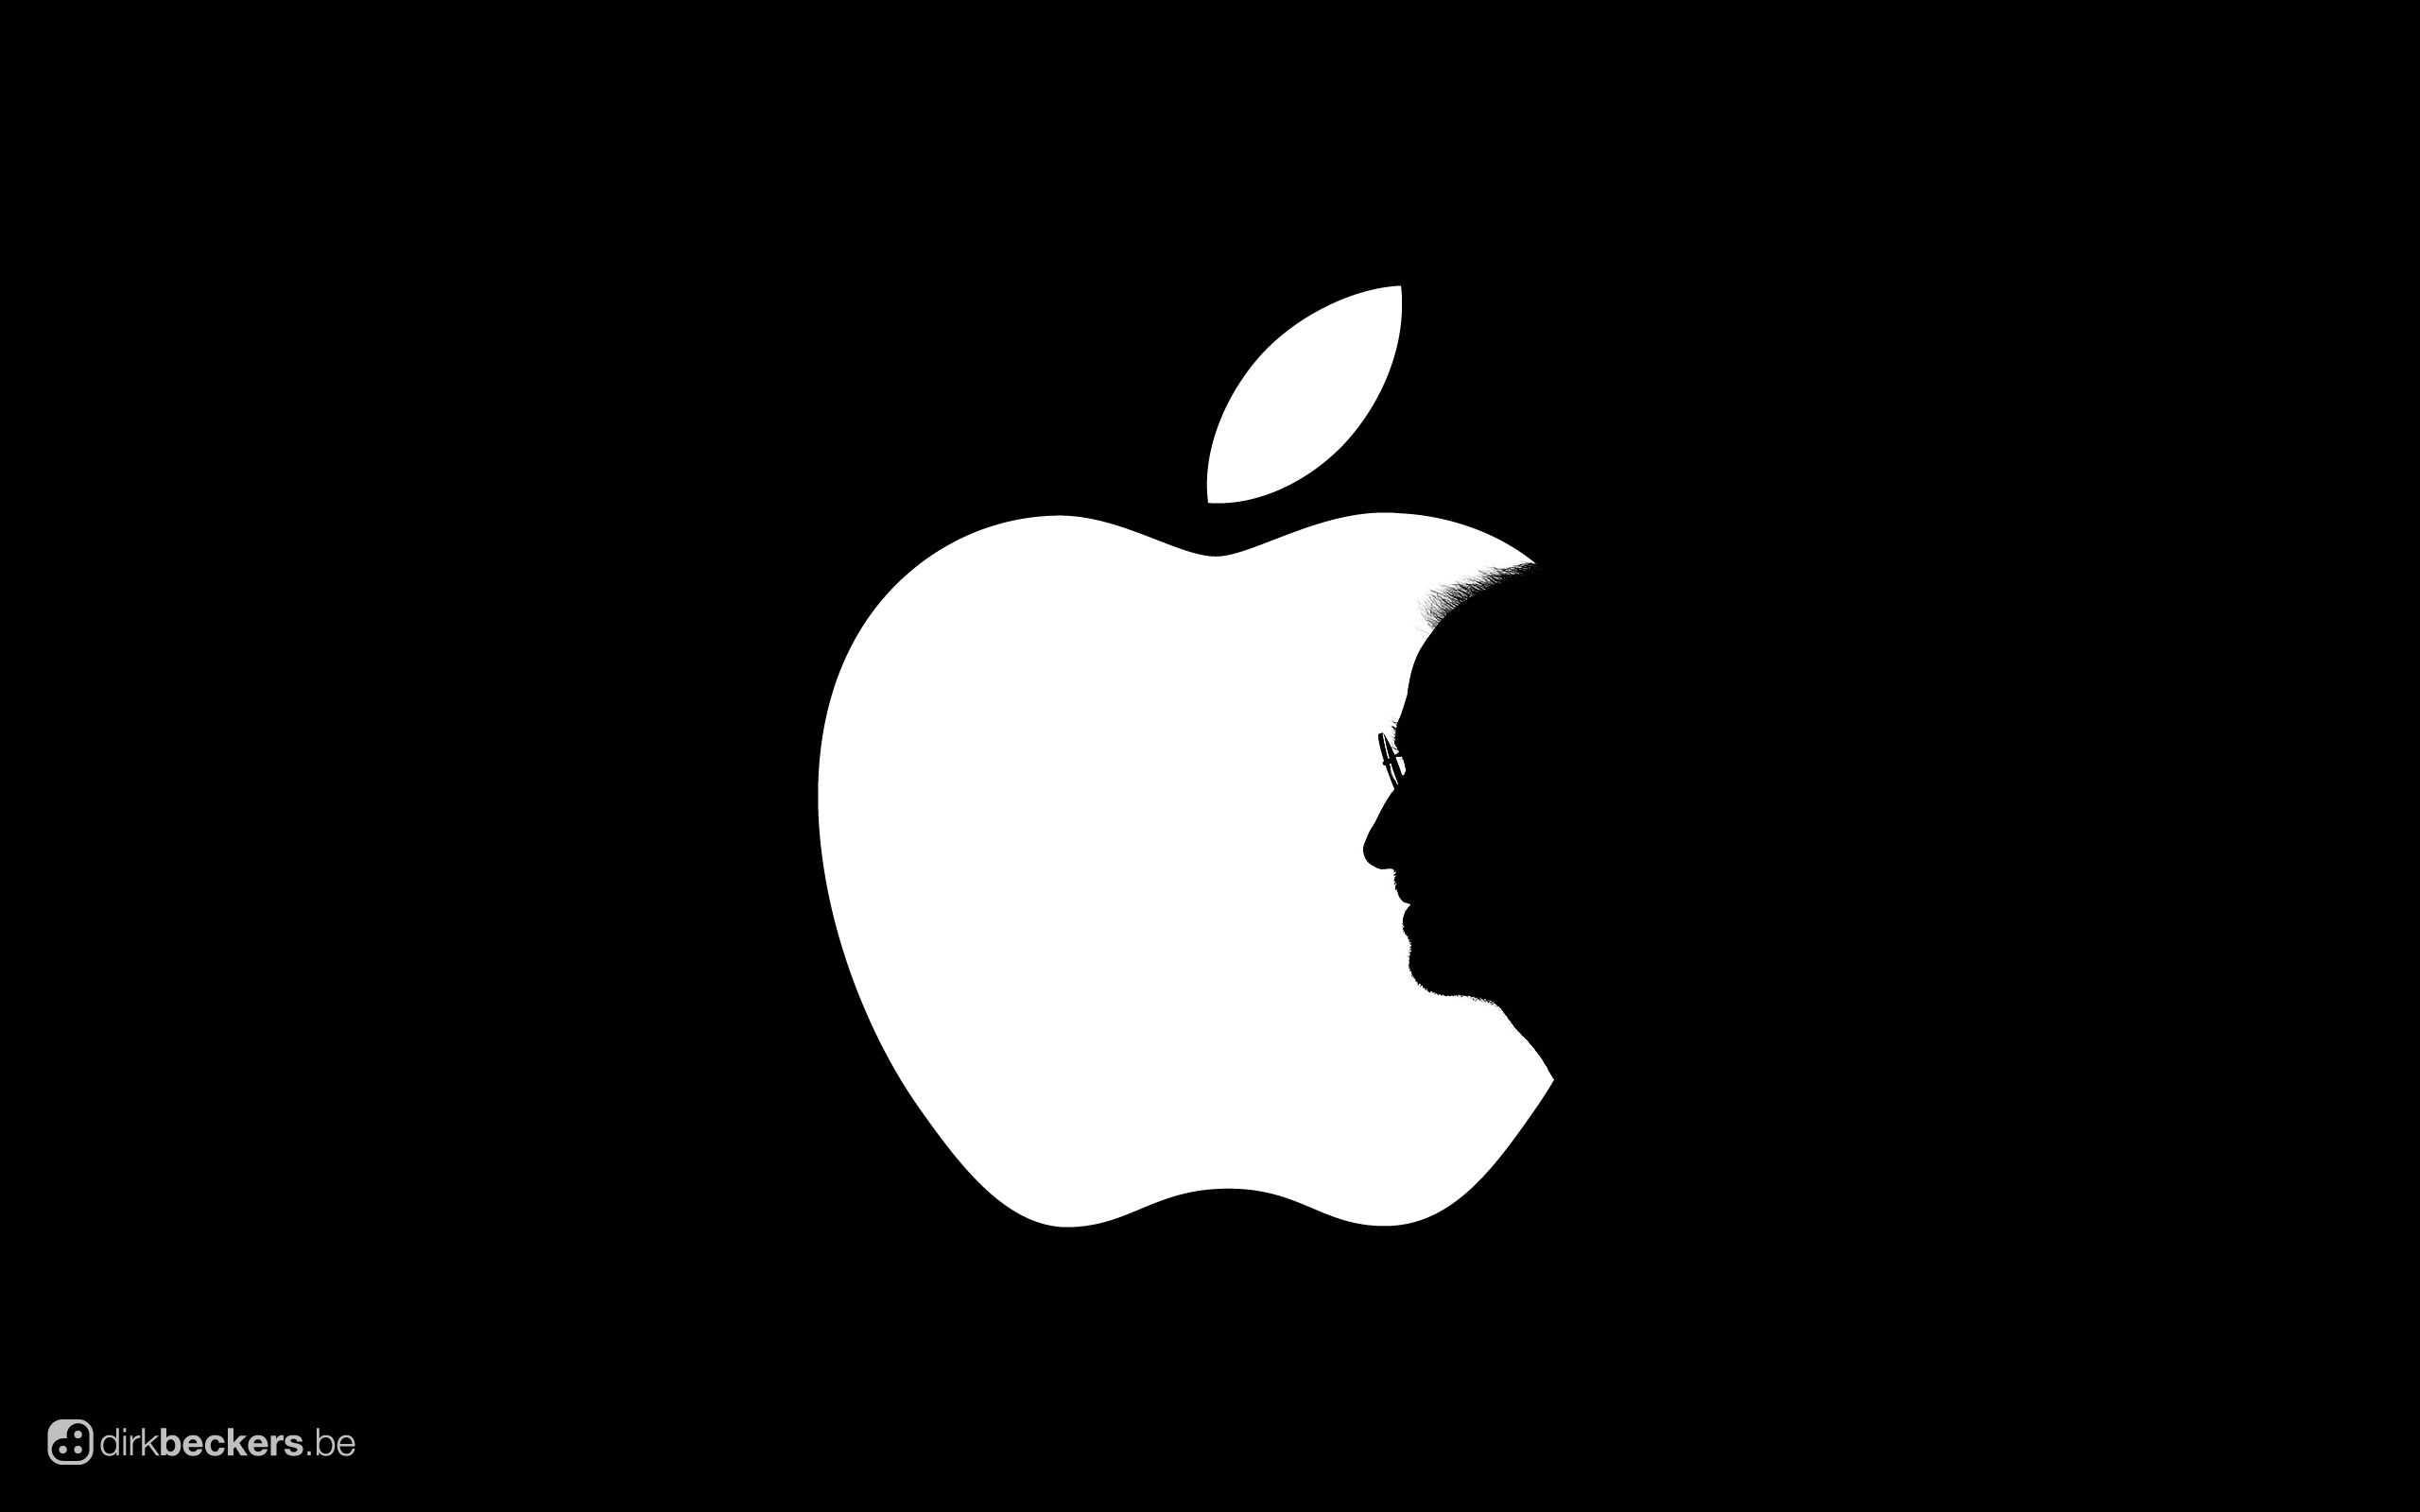 Free Wallpaper Of A Special Sign: Tribute To Steve Jobs | Free ...